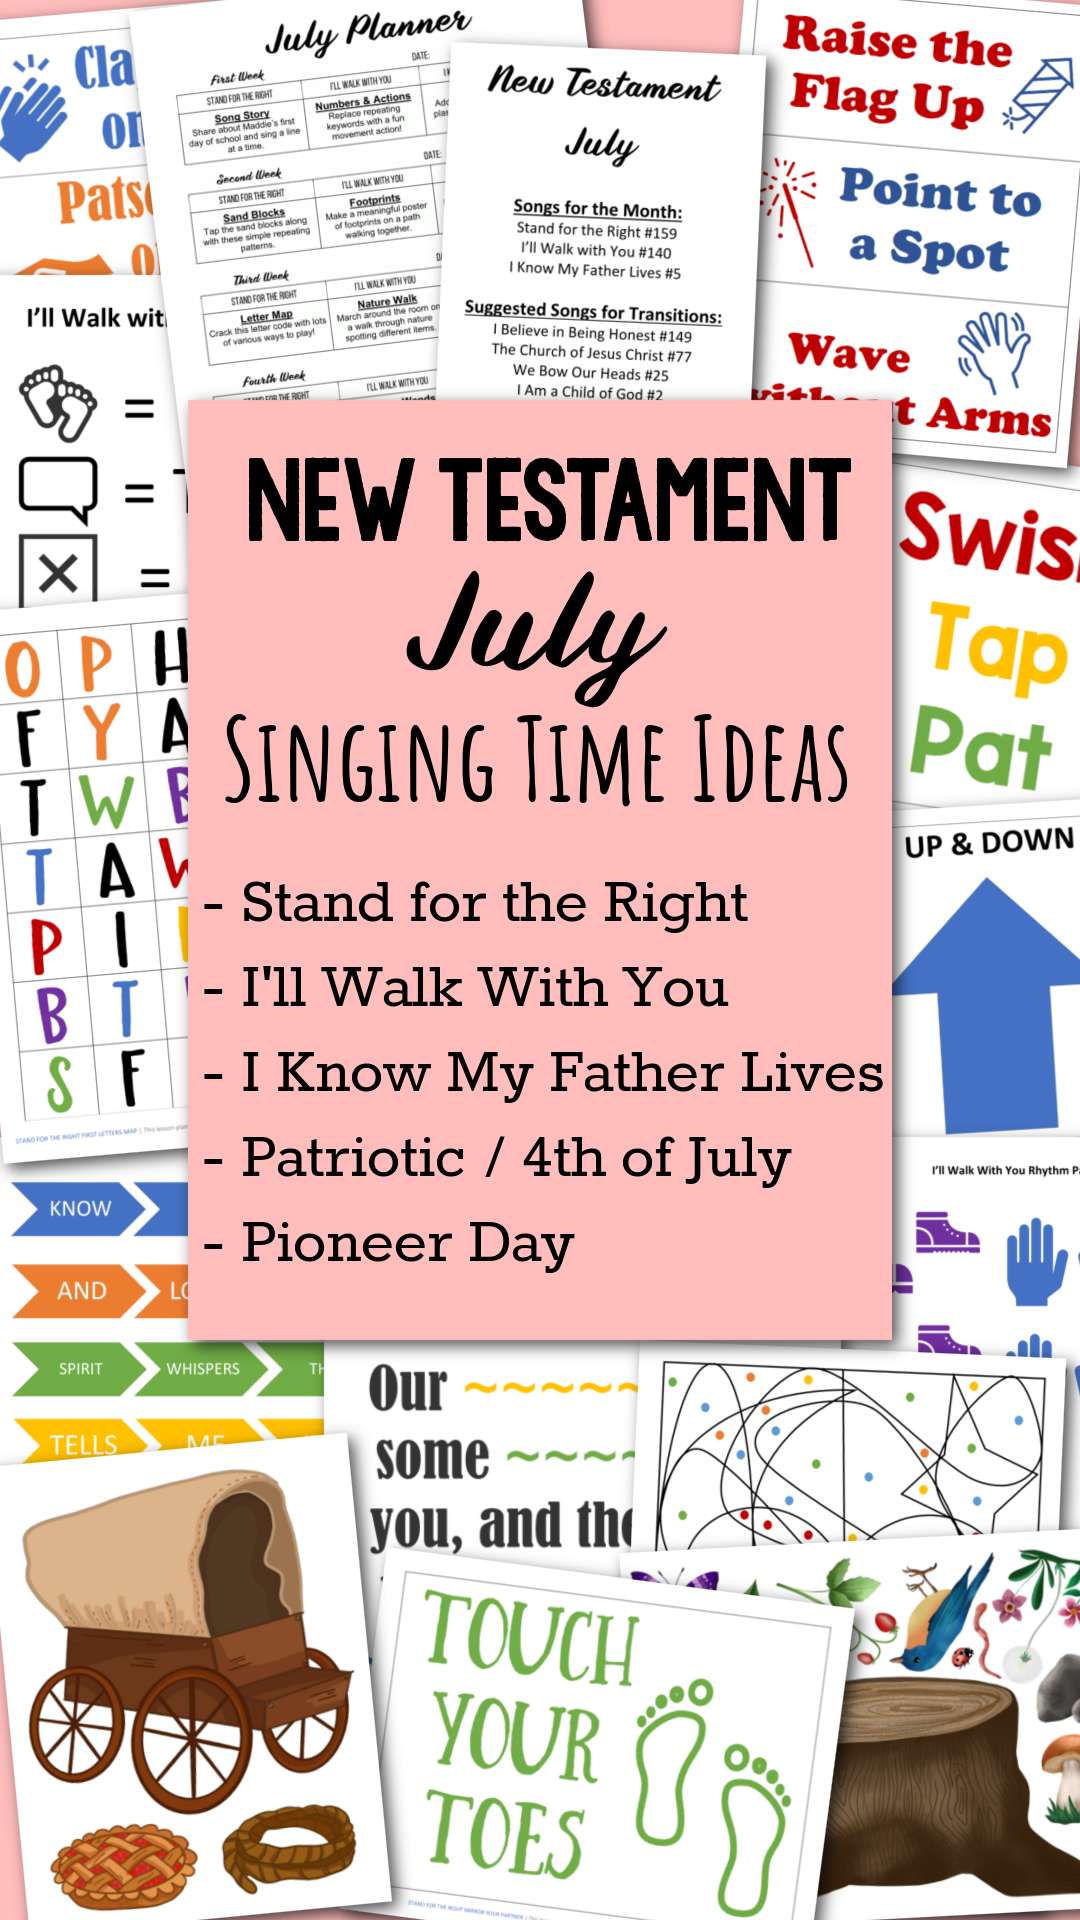 July New Testament Primary Singing time ideas and fun activities to teach all of the recommended songs of the month, plus holiday ideas!